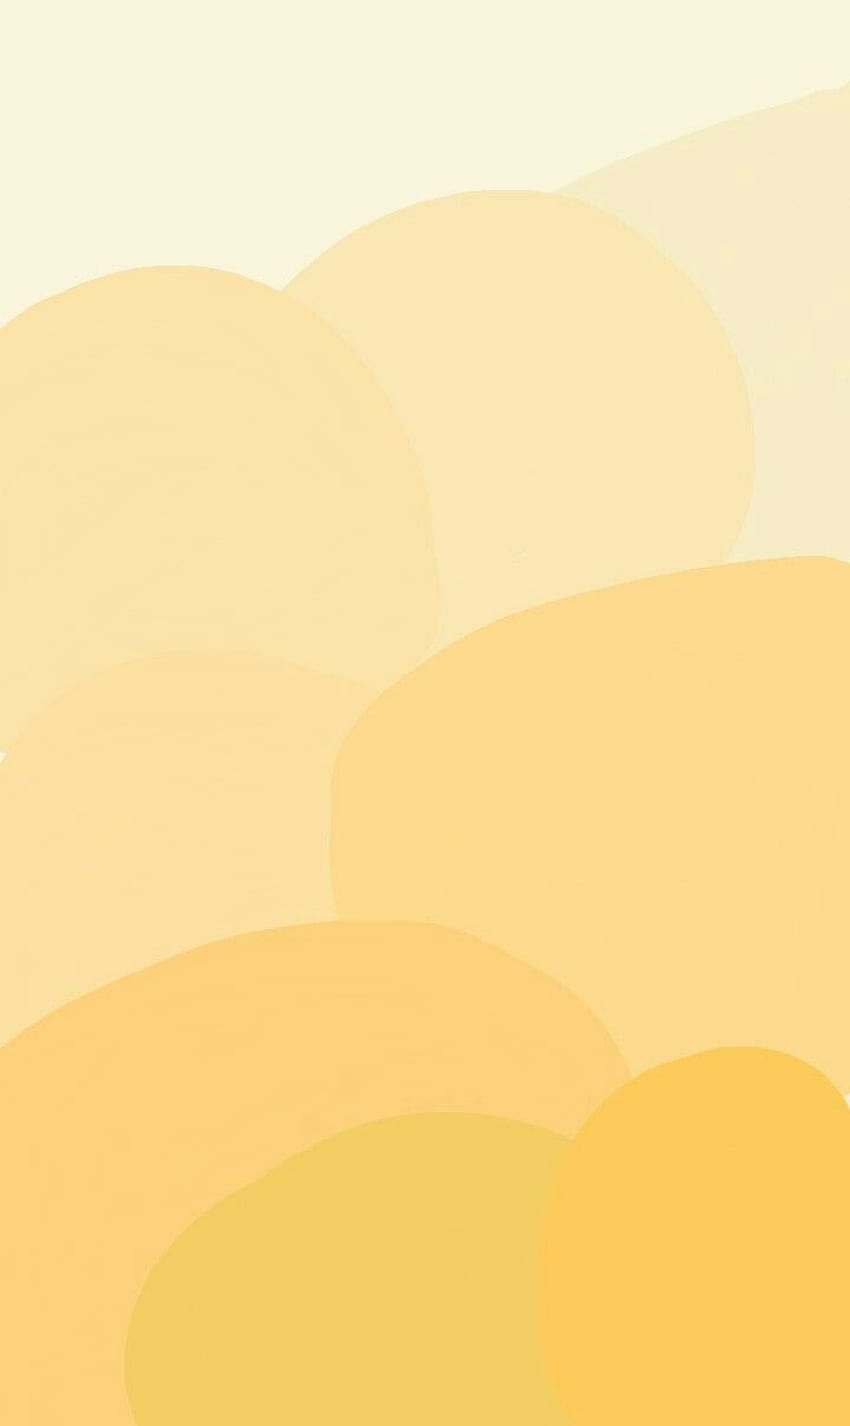 A yellow and orange background with some clouds - Yellow, yellow iphone, pastel yellow, sunlight, sunshine, light yellow